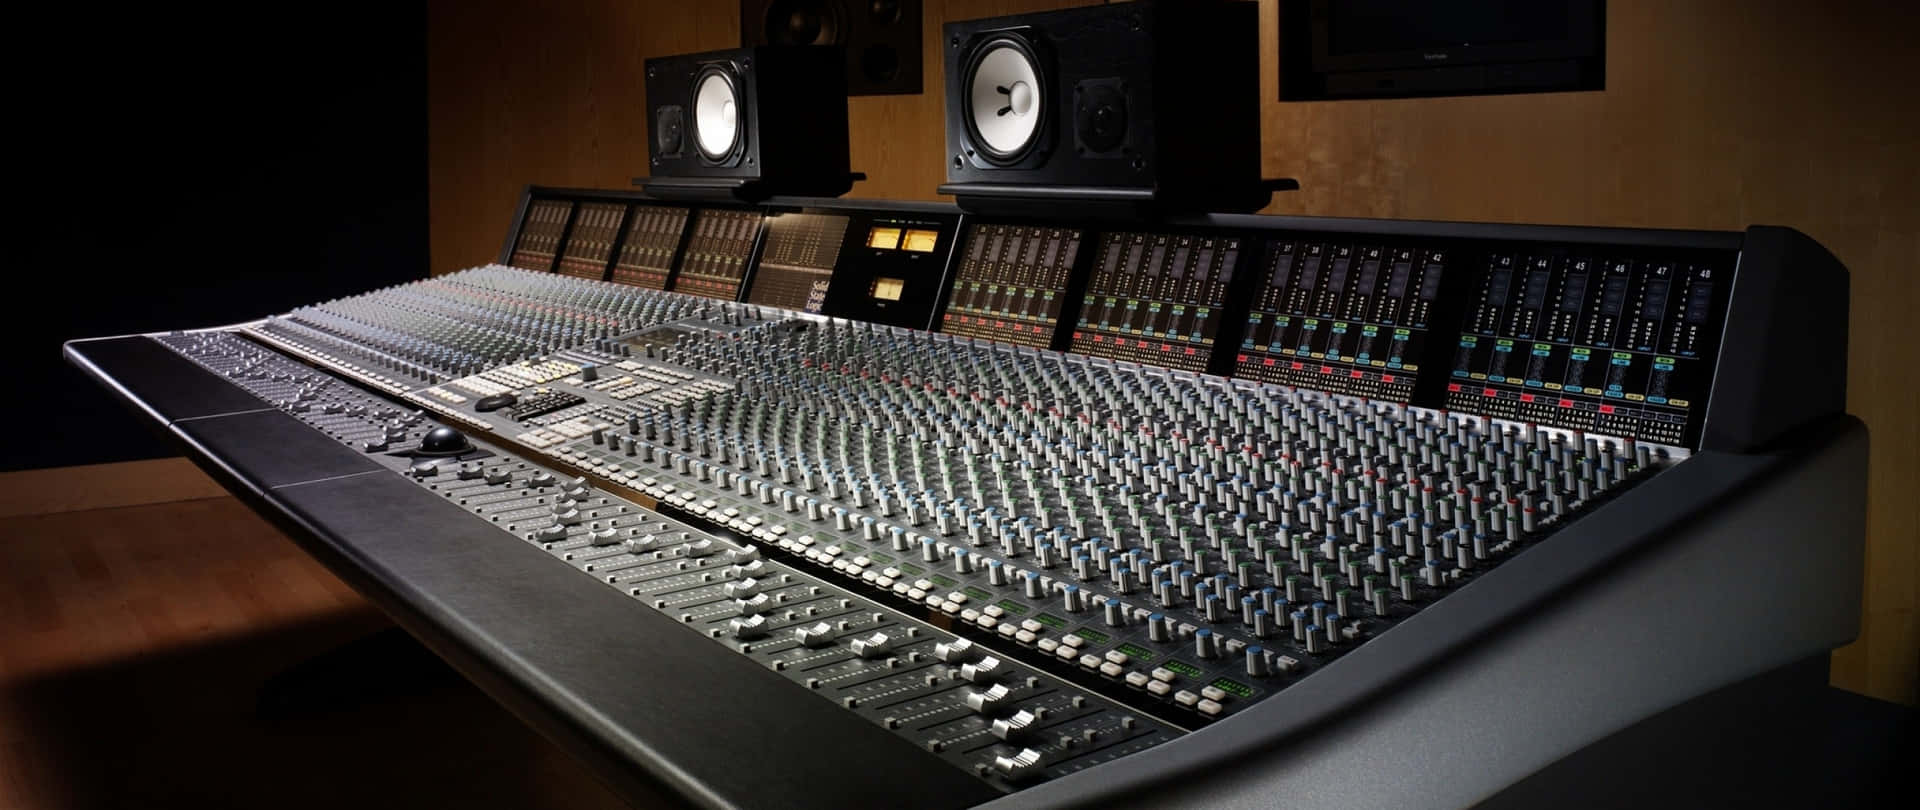 A Large Mixing Desk With Two Speakers